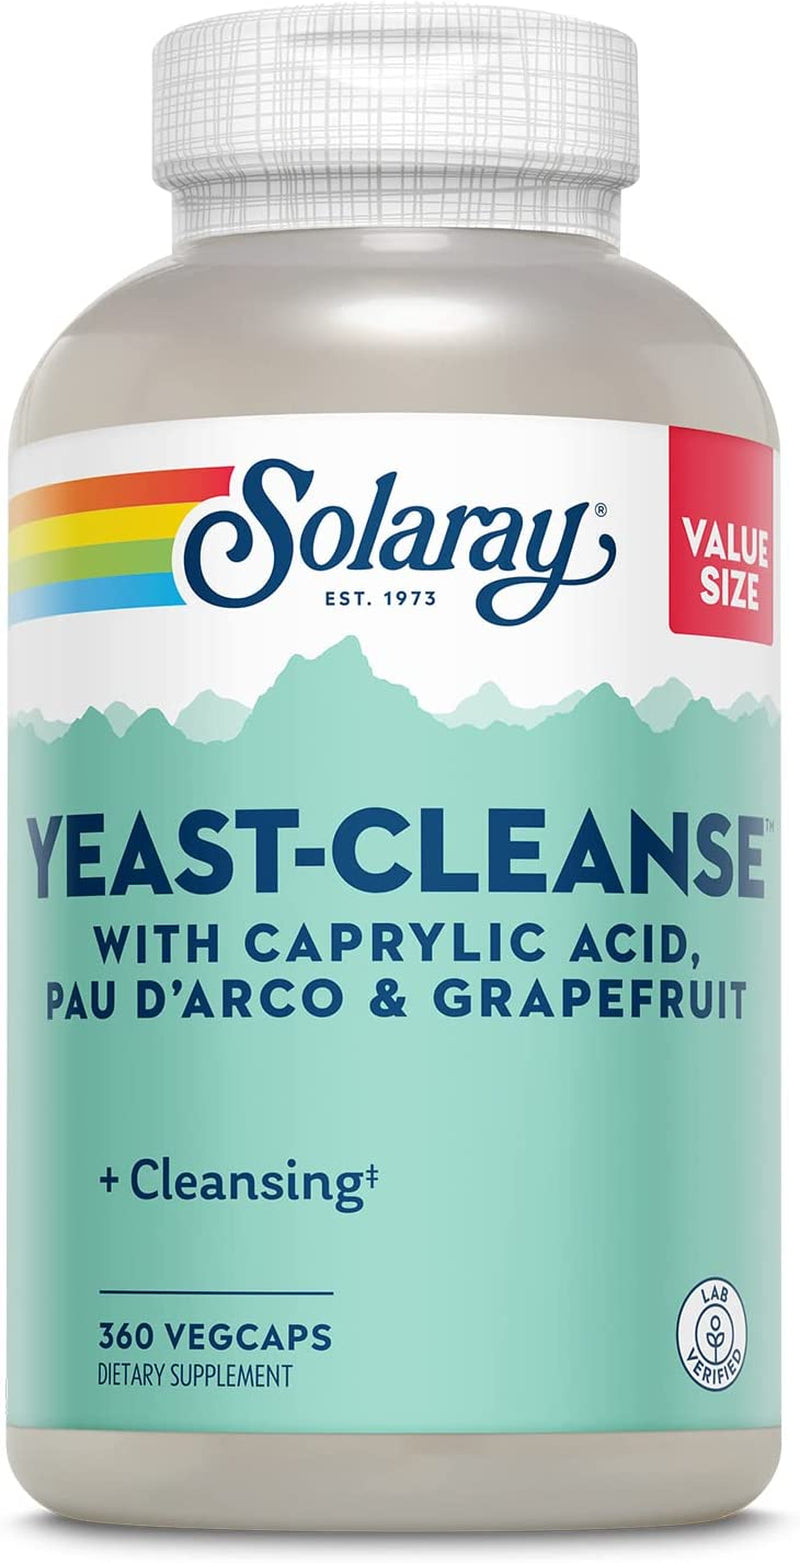 SOLARAY Yeast Cleanse, Detox Cleanse for Healthy Yeast Balance Support, with Caprylic Acid, PAU D'Arco, Licorice Root Extract and Grapefruit Seed Extract, 60-Day Guarantee, 60 Servings, 360 Vegcaps